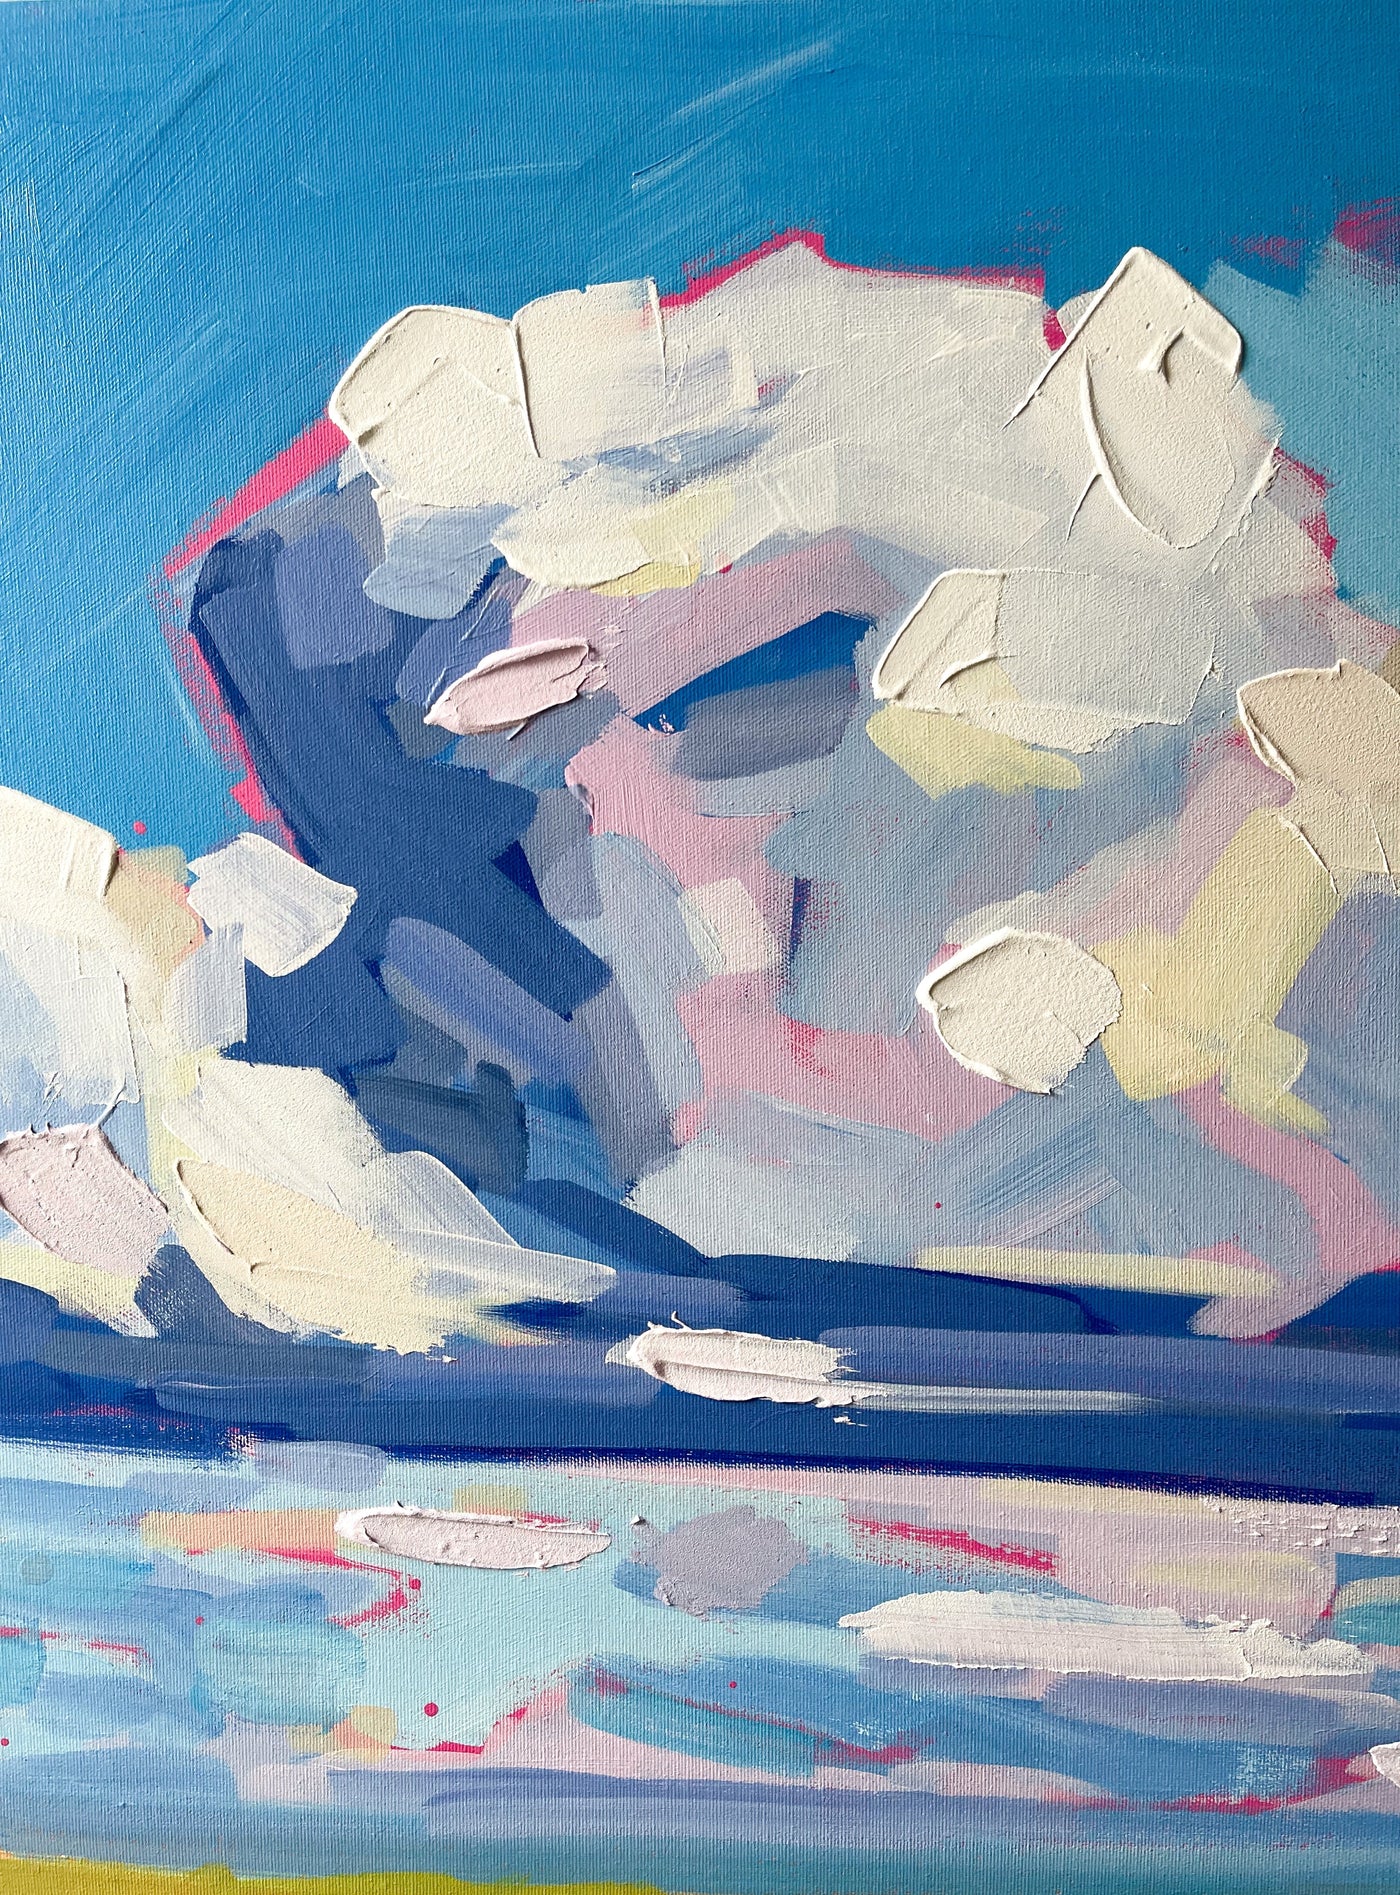 Head in the Clouds, 60x24 inches